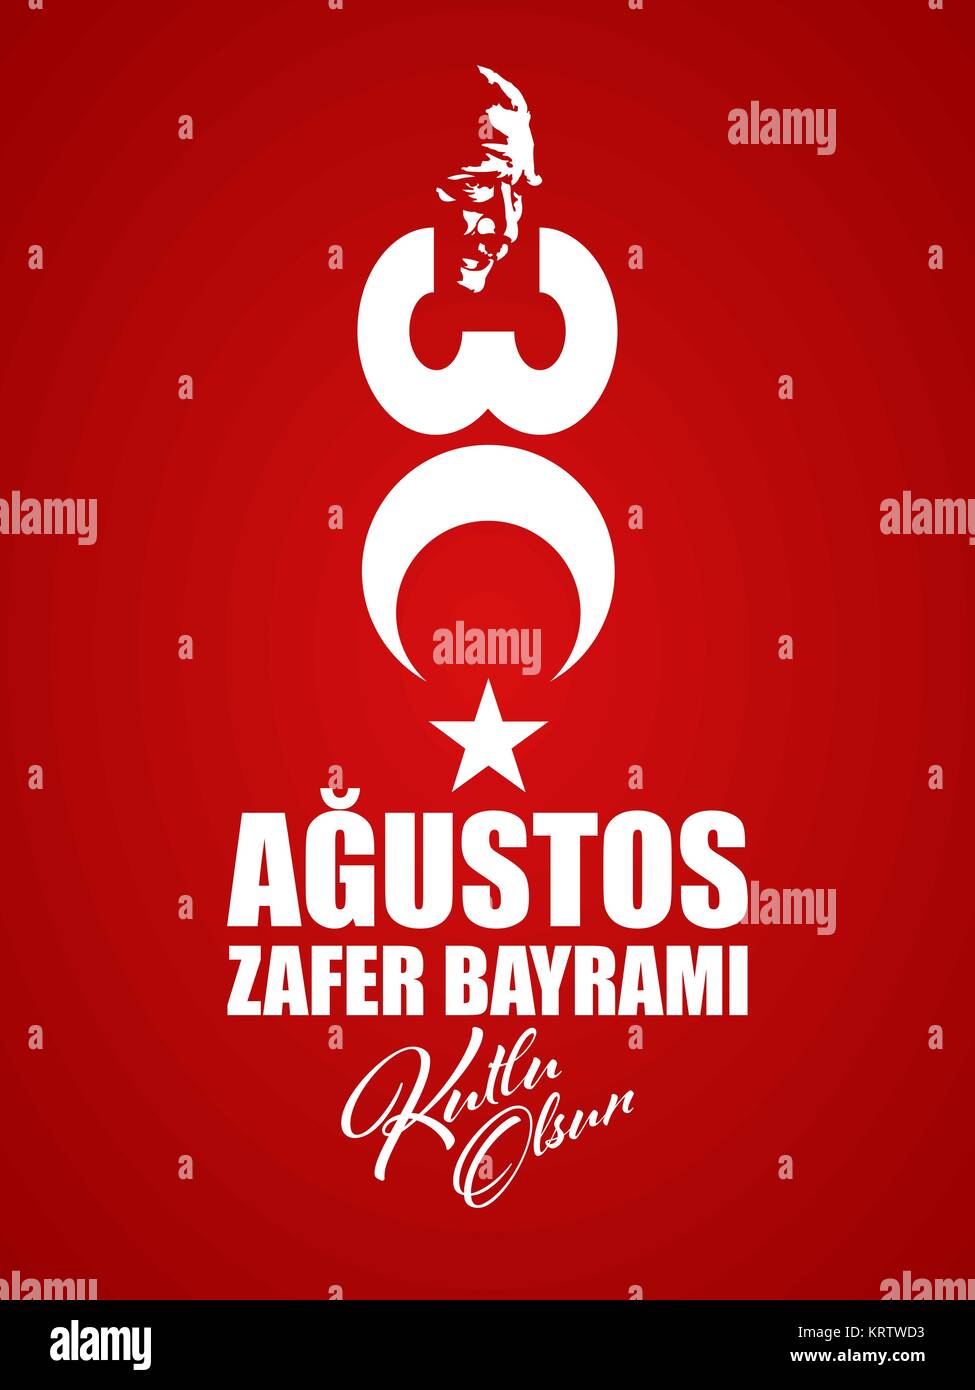 30 Agustos Zafer Bayrami Tebrik Karti - August 30 Victory Day of Turkey. Greeting card concept on red background. Stock Vector